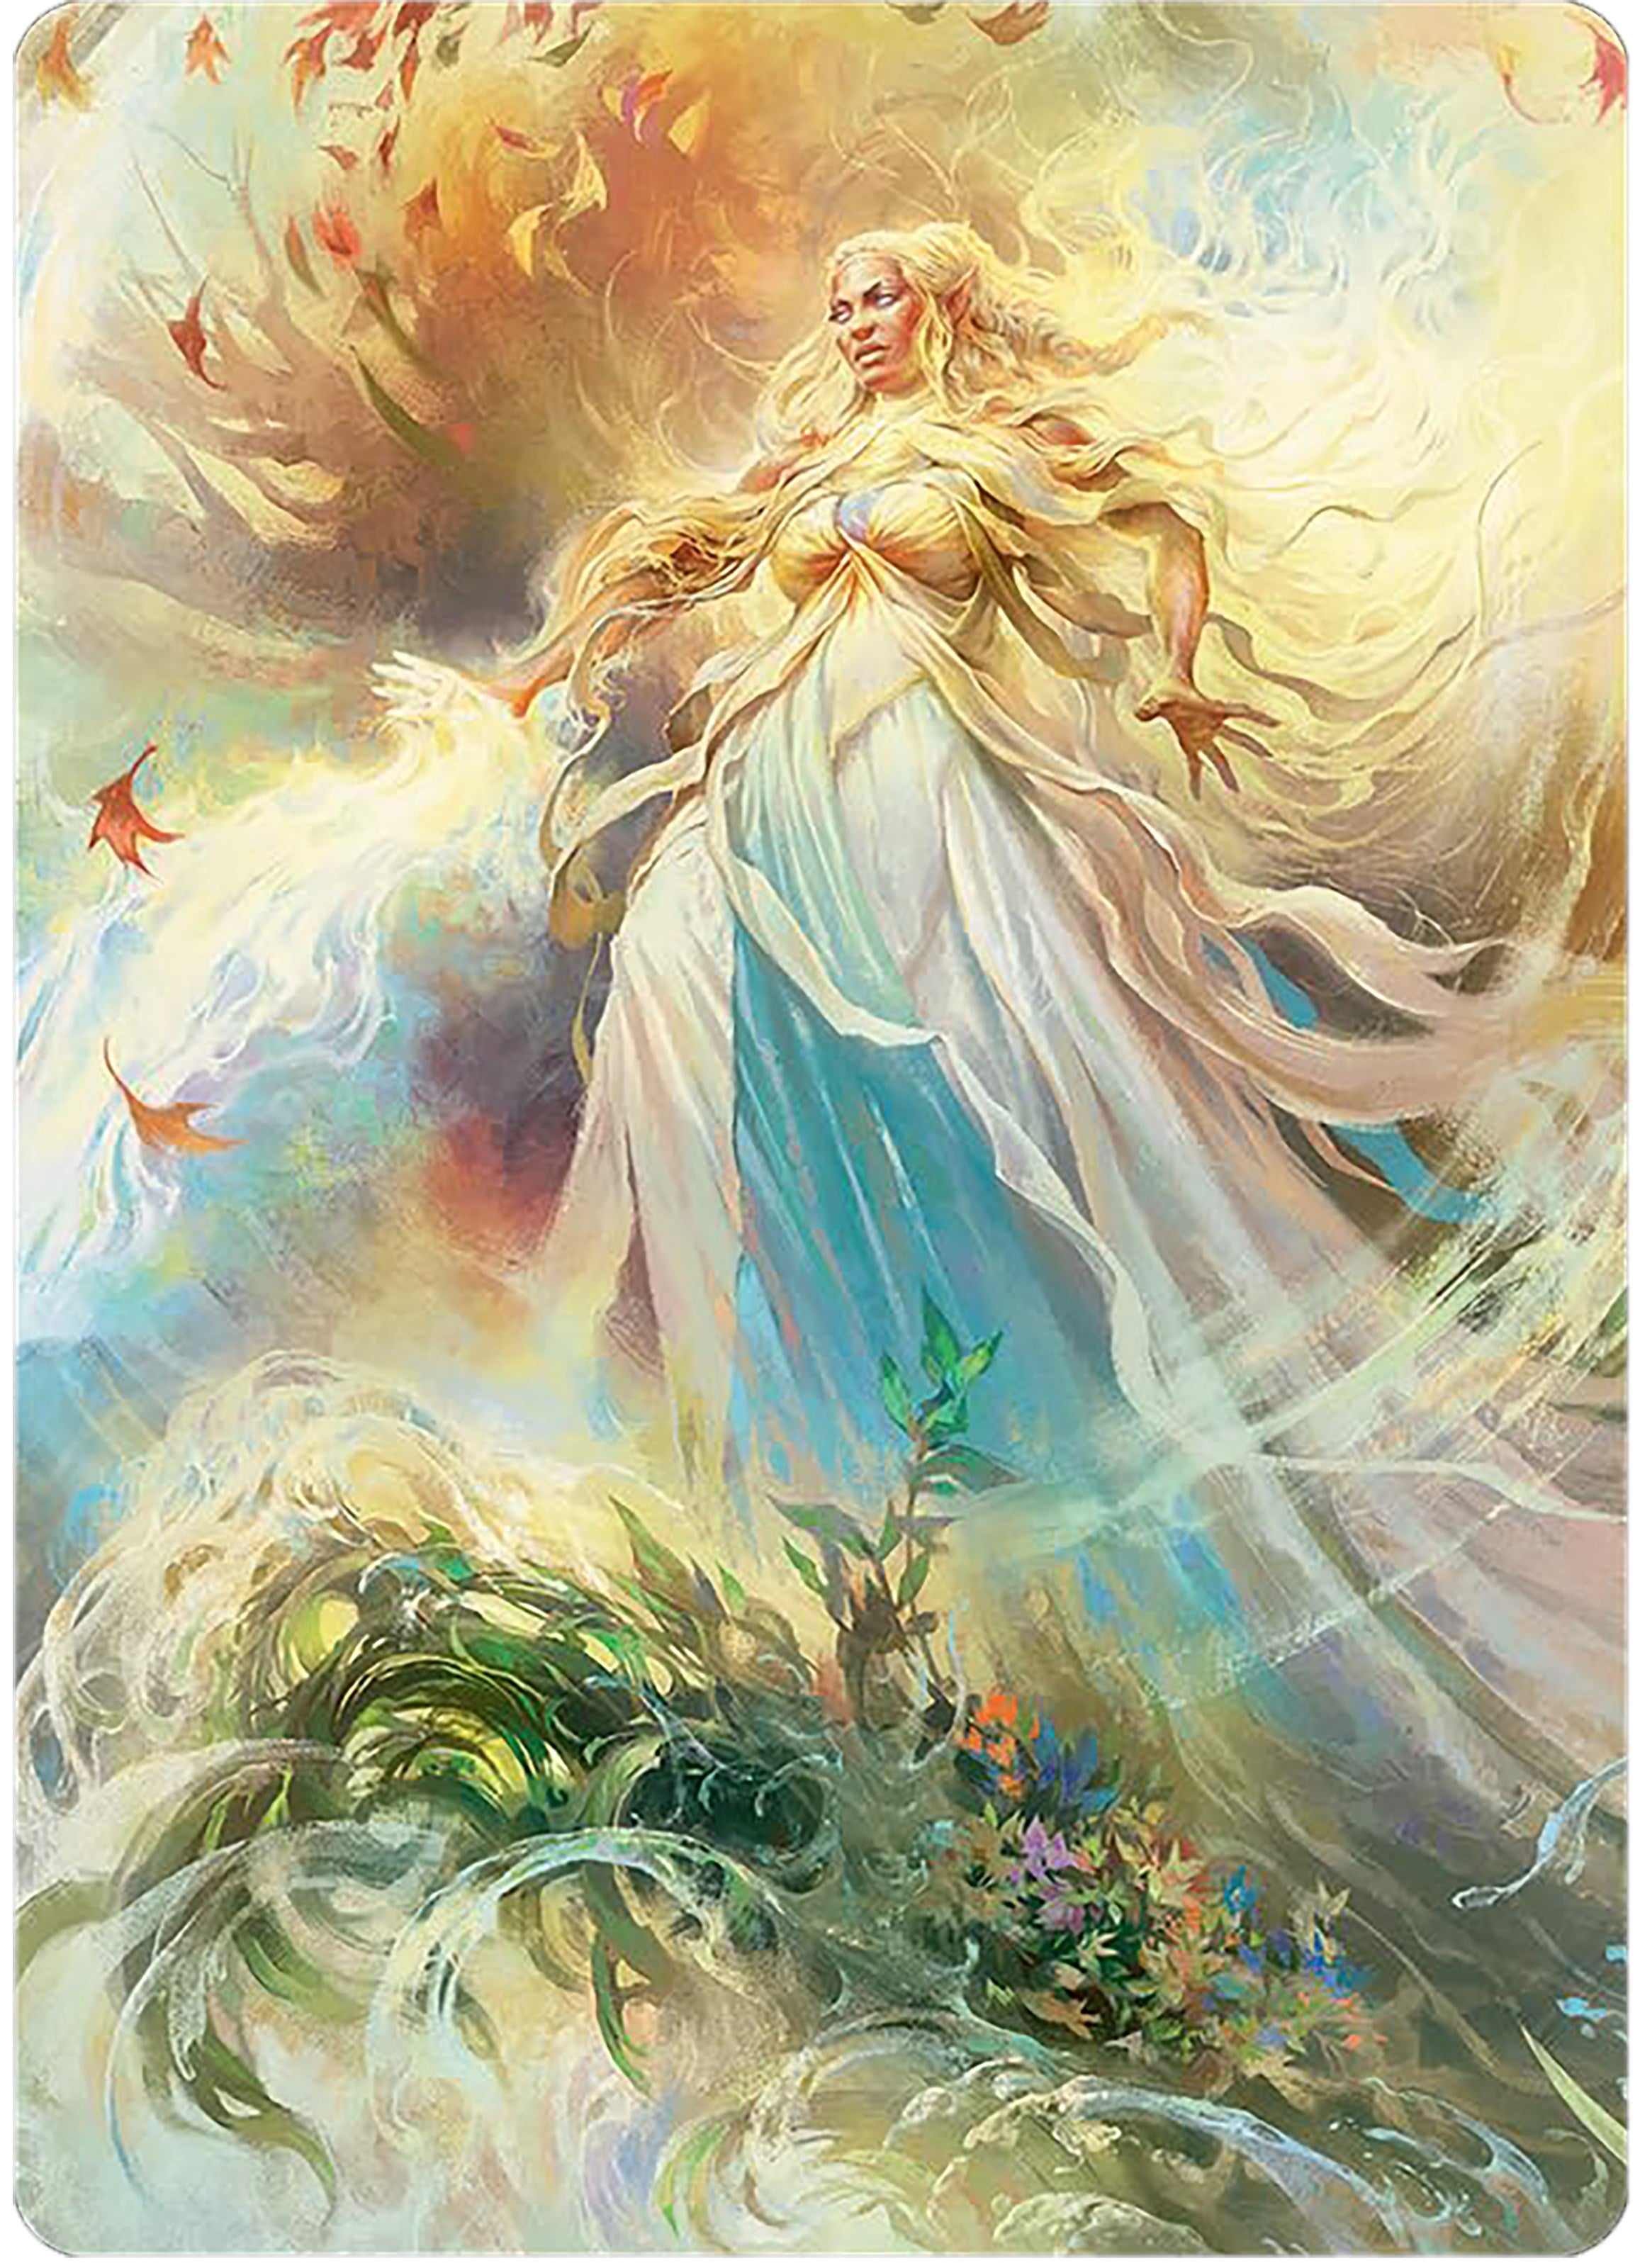 Galadriel, Light of Valinor Art Card [The Lord of the Rings: Tales of Middle-earth Art Series]